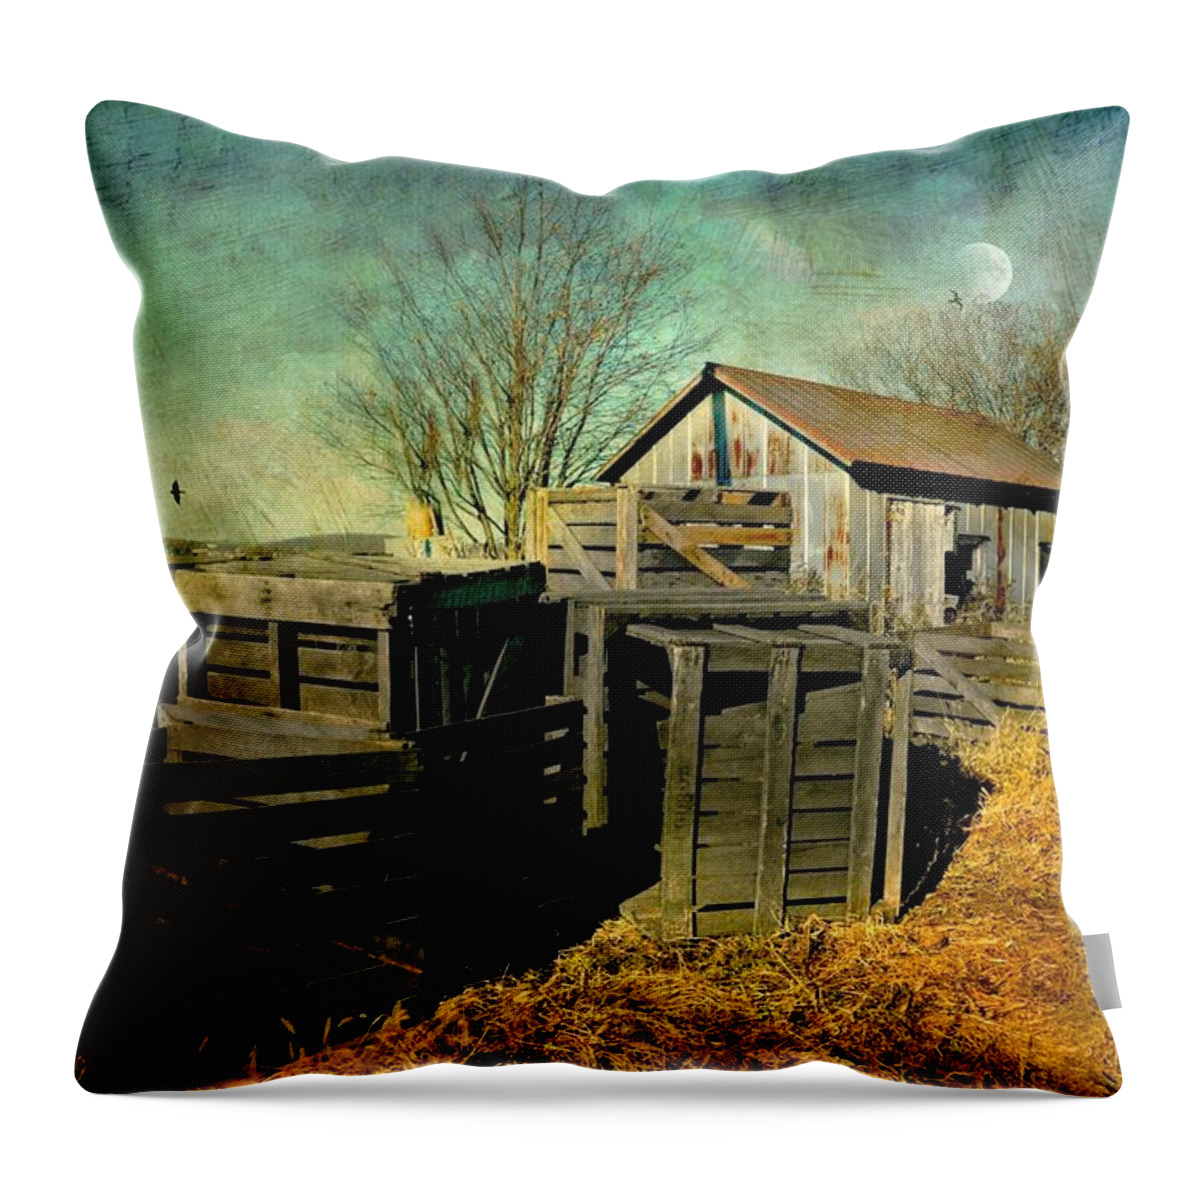 Landscape Throw Pillow featuring the photograph Crates'n Cabin by Diana Angstadt